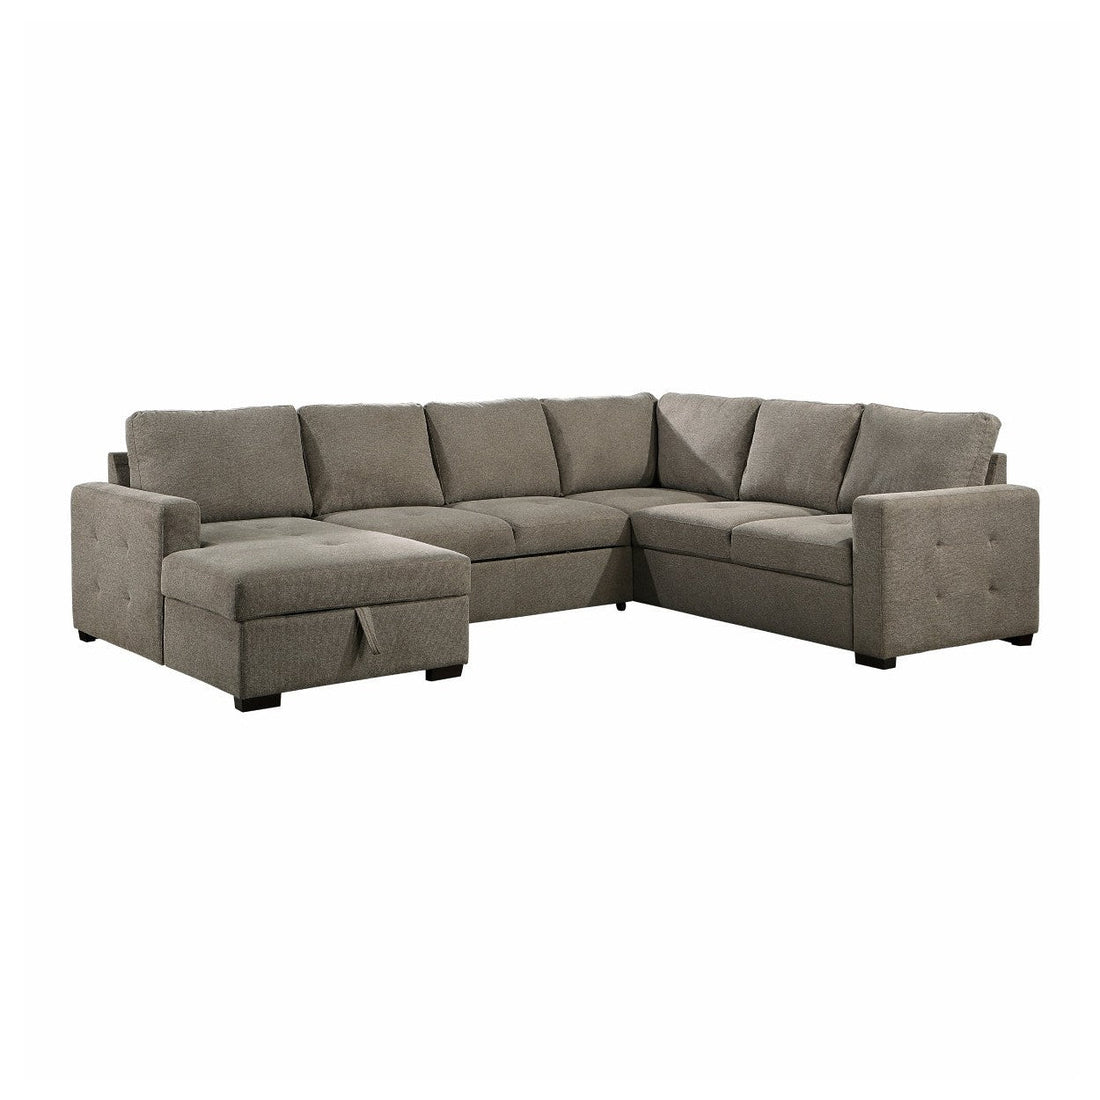 (3/3) 3-Piece Sectional with Left Chaise and Hidden Storage 9206BR*3LC3R